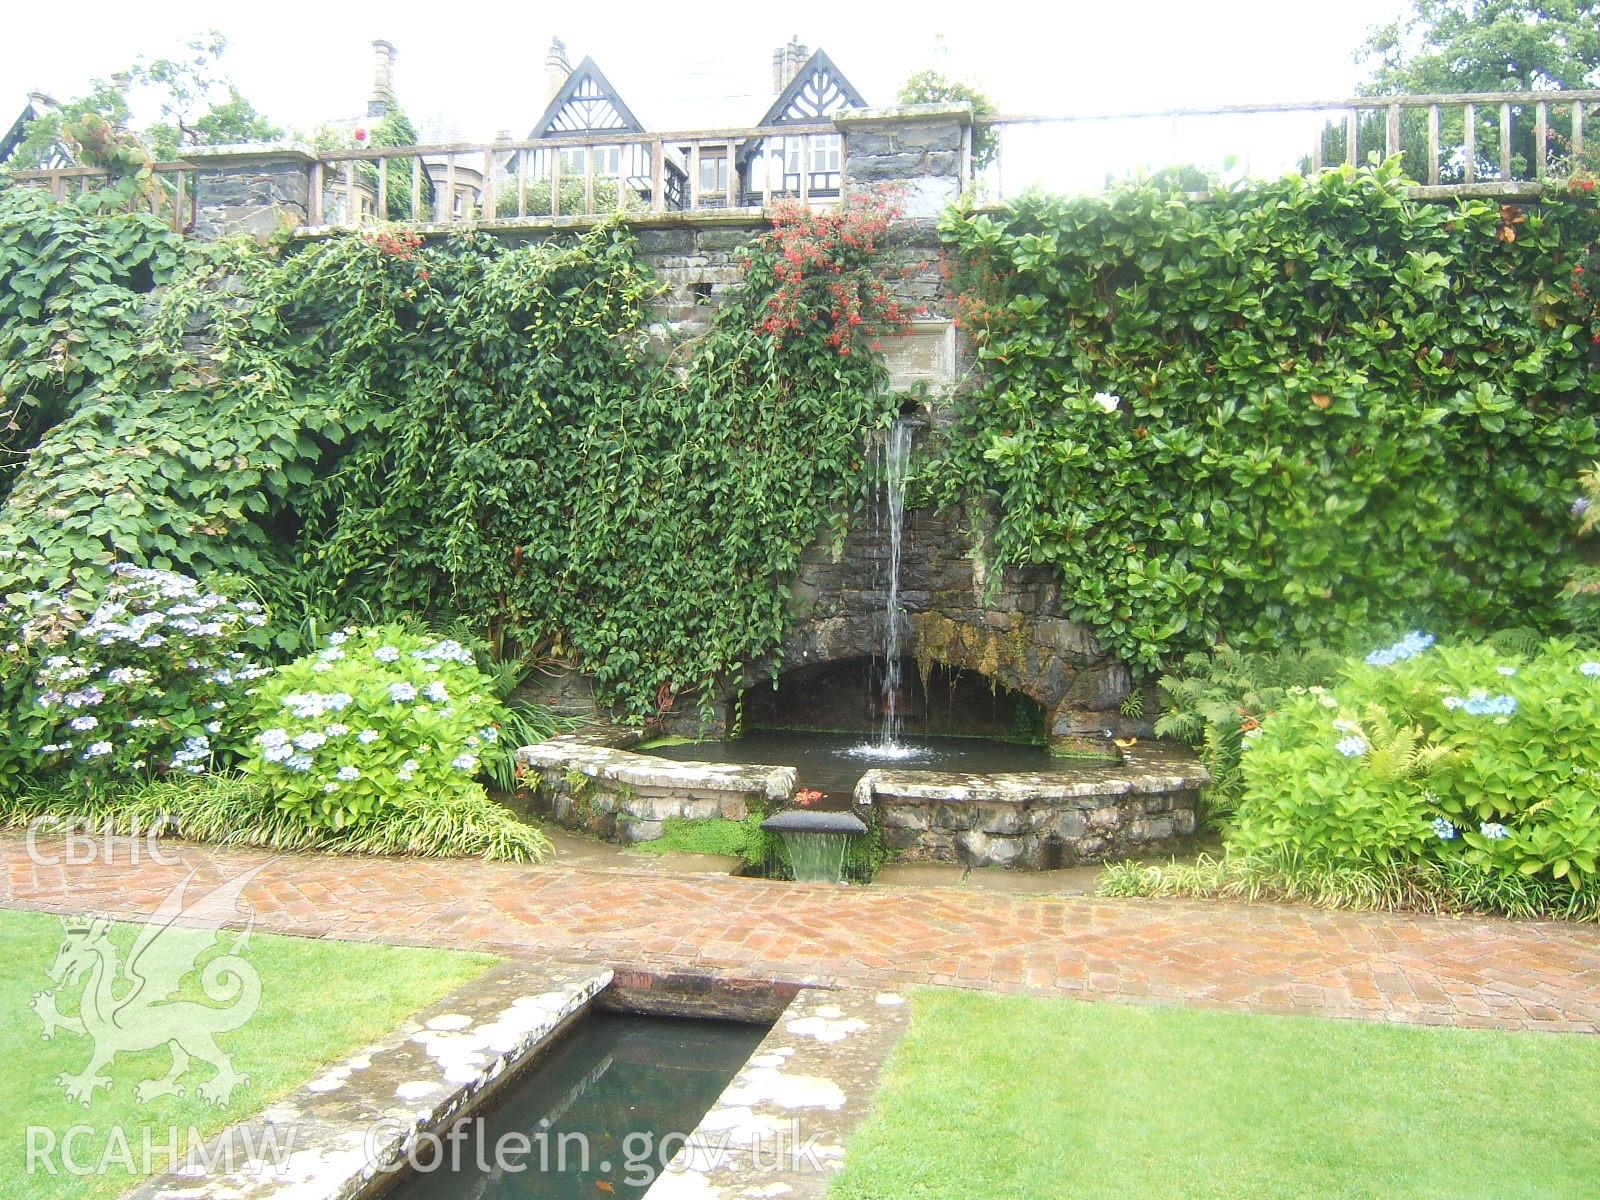 Lily Terrace water inlet, pool and rill with 1905 plaque above on north-east retaining wall to Croquet Terrace.